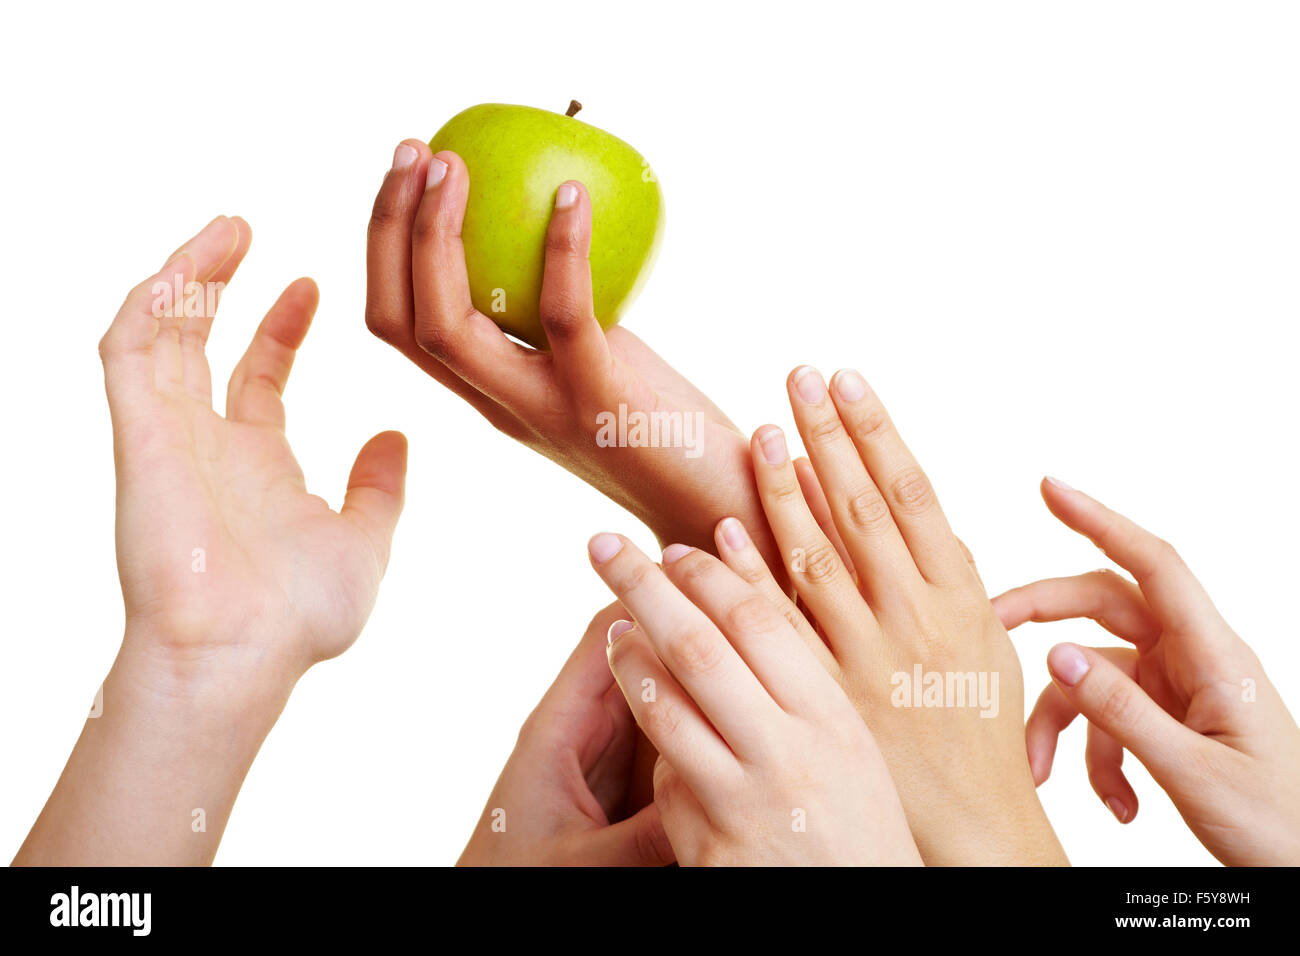 Many desperate hands reaching for a green apple Stock Photo